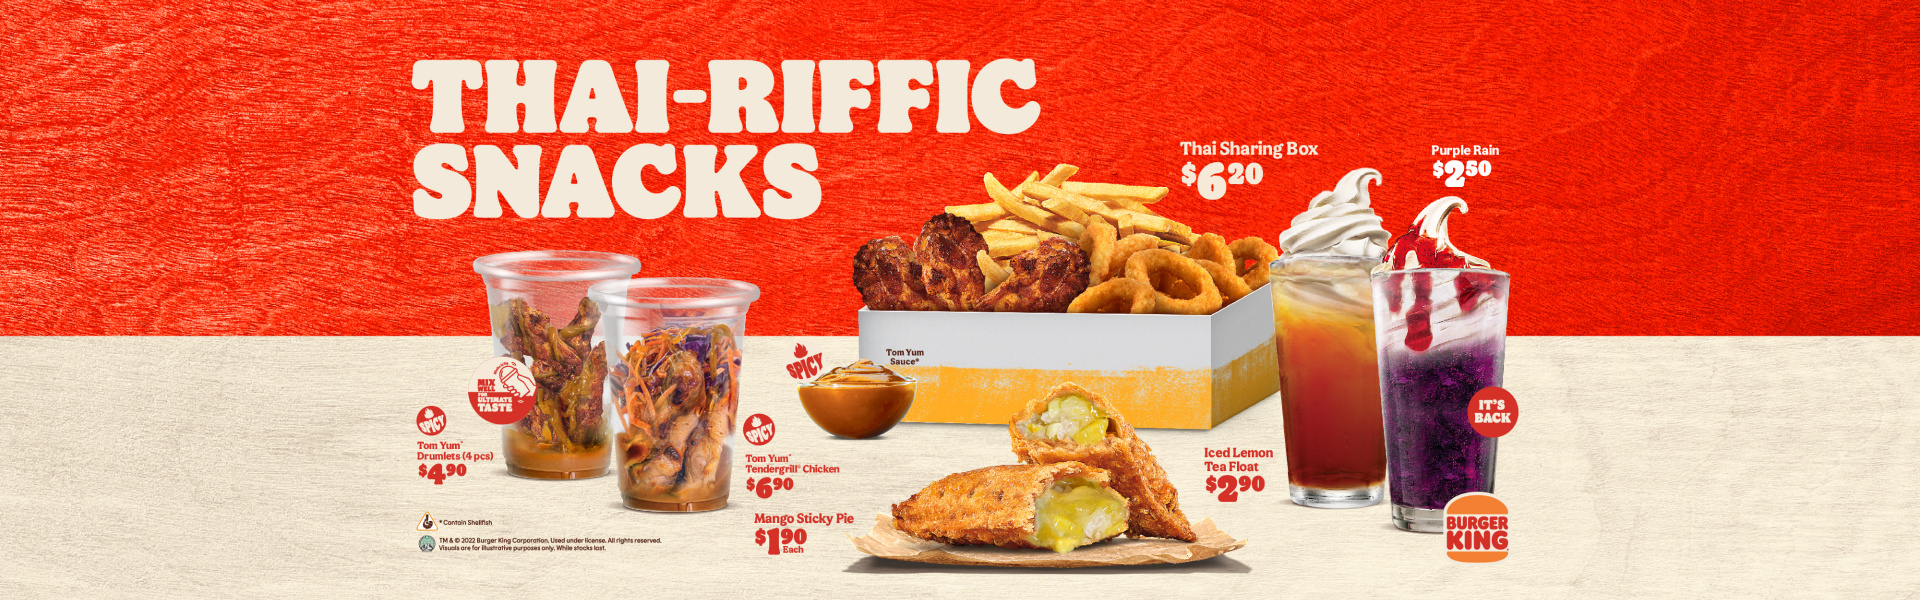 Burger King S’pore now selling Tom Yum burger, nuggets and drumlets; has mango-sticky pie too - 2